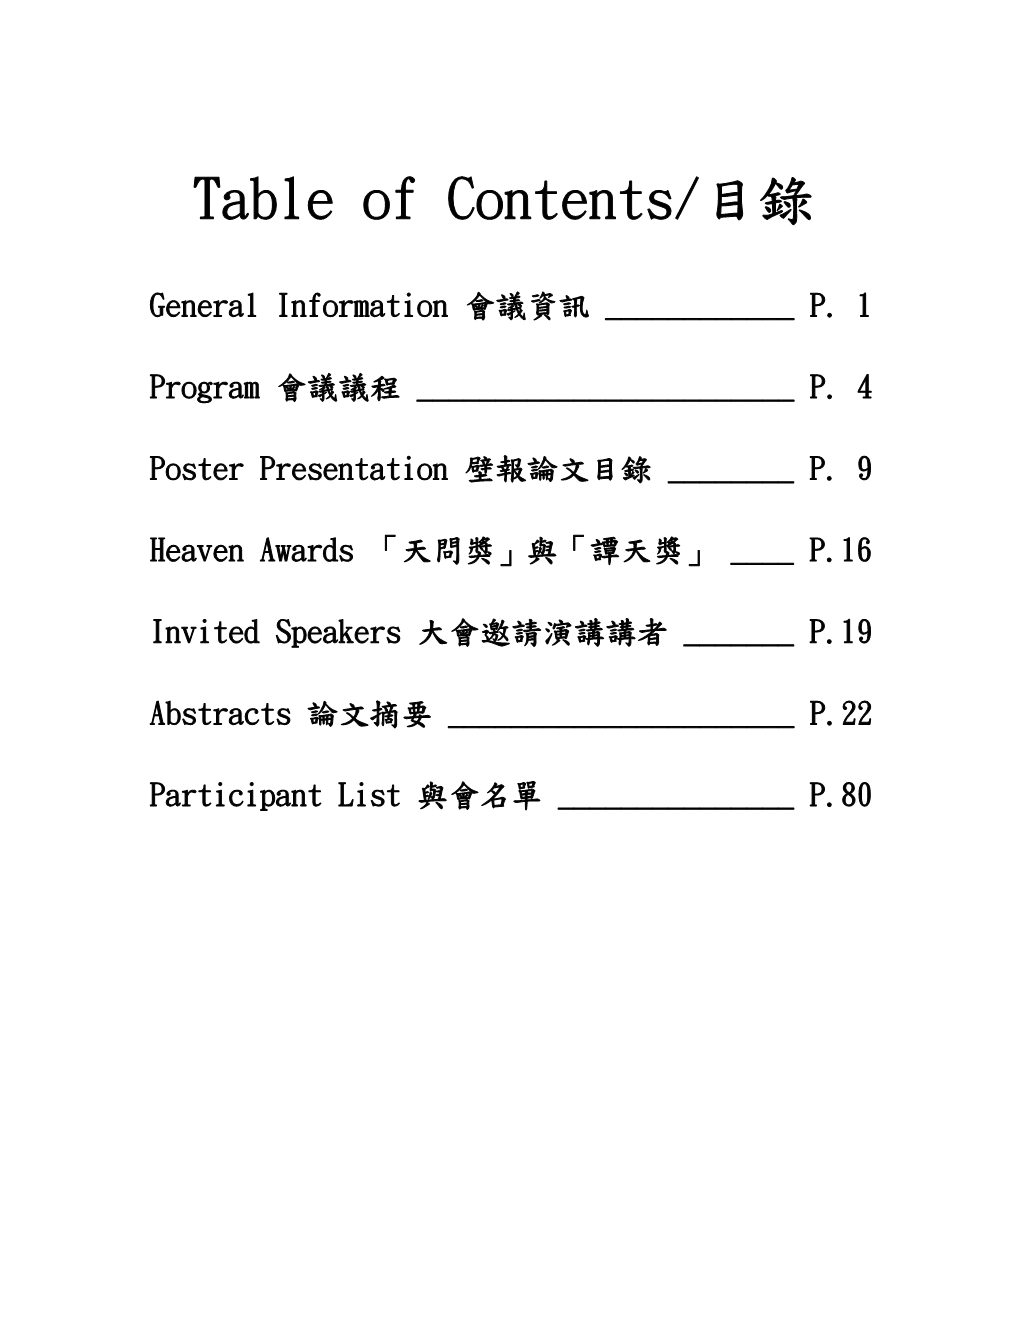 Table of Contents/目錄